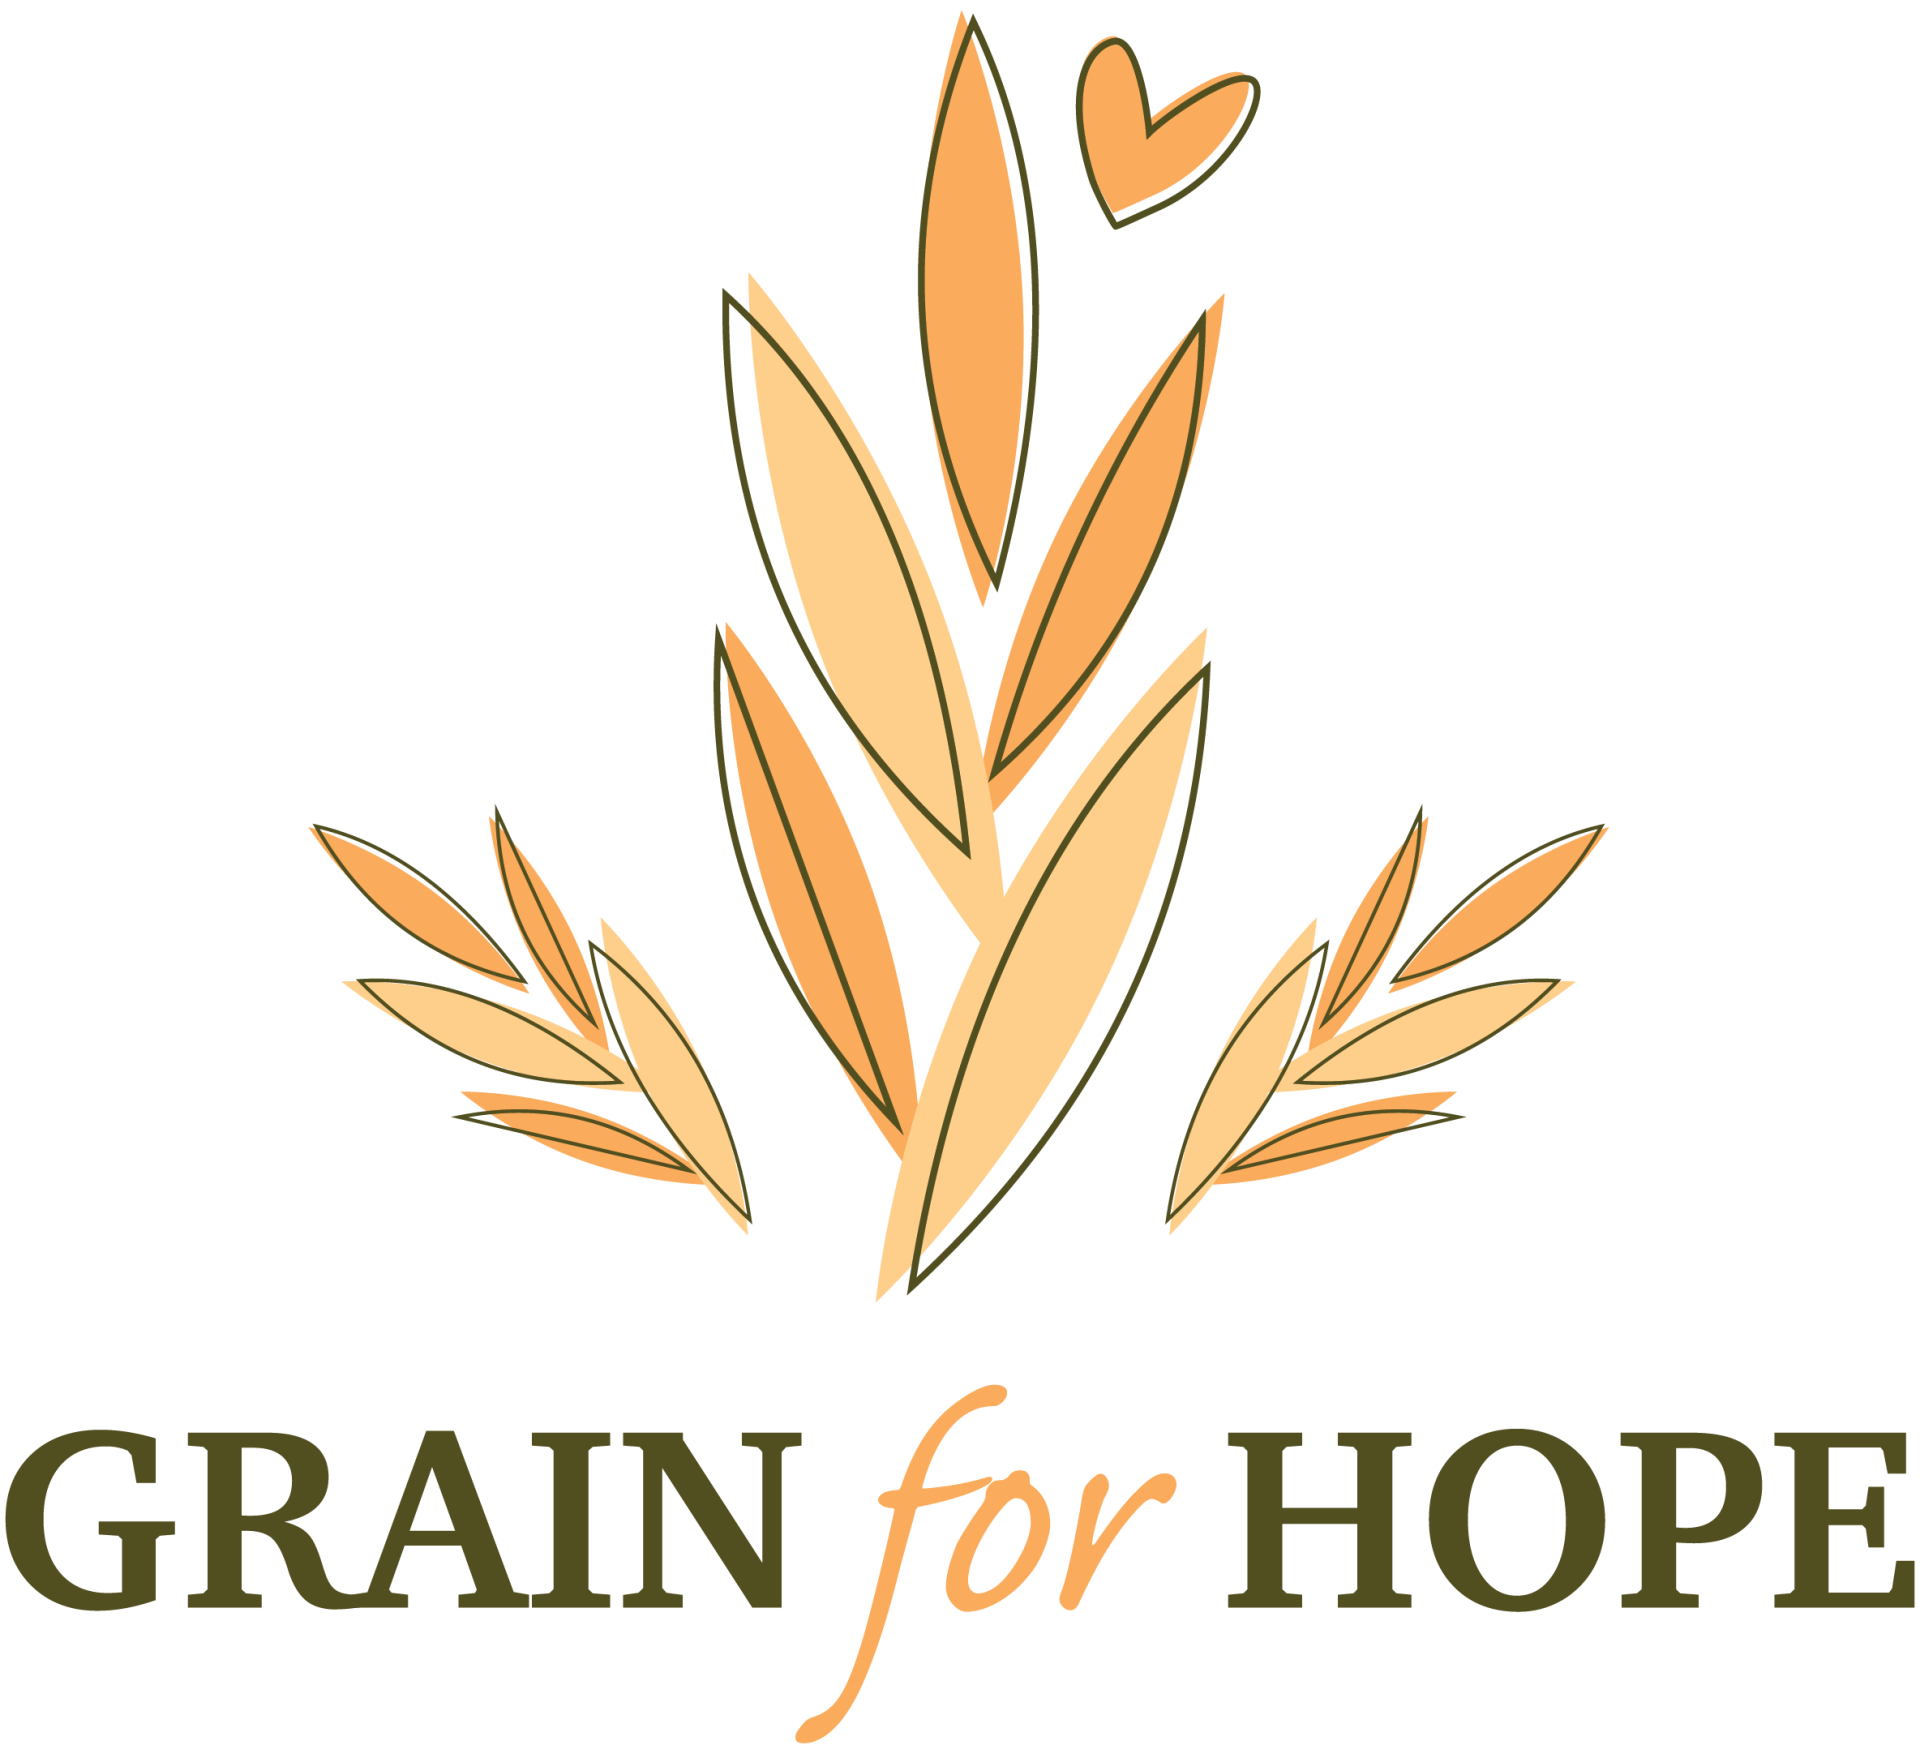 More about Grain for Hope